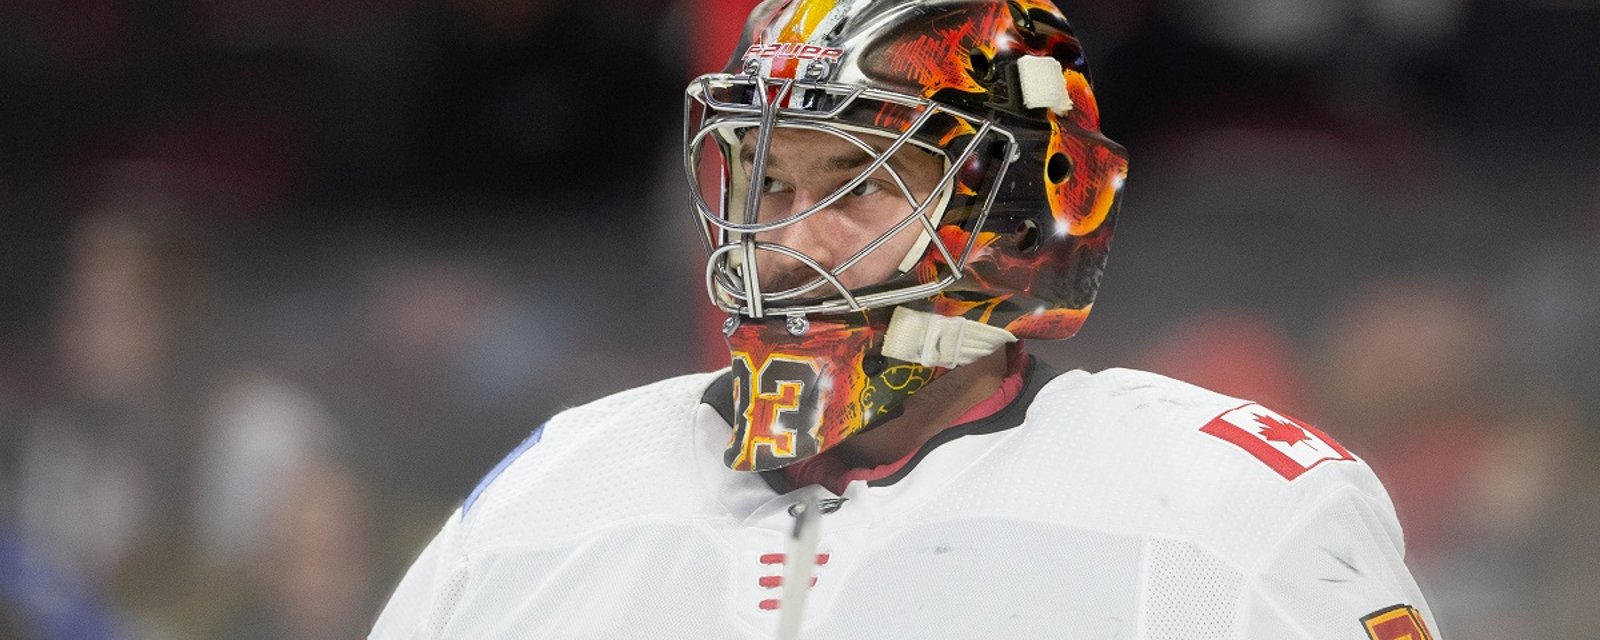 The Maple Leafs have acquired goaltender David Rittich.